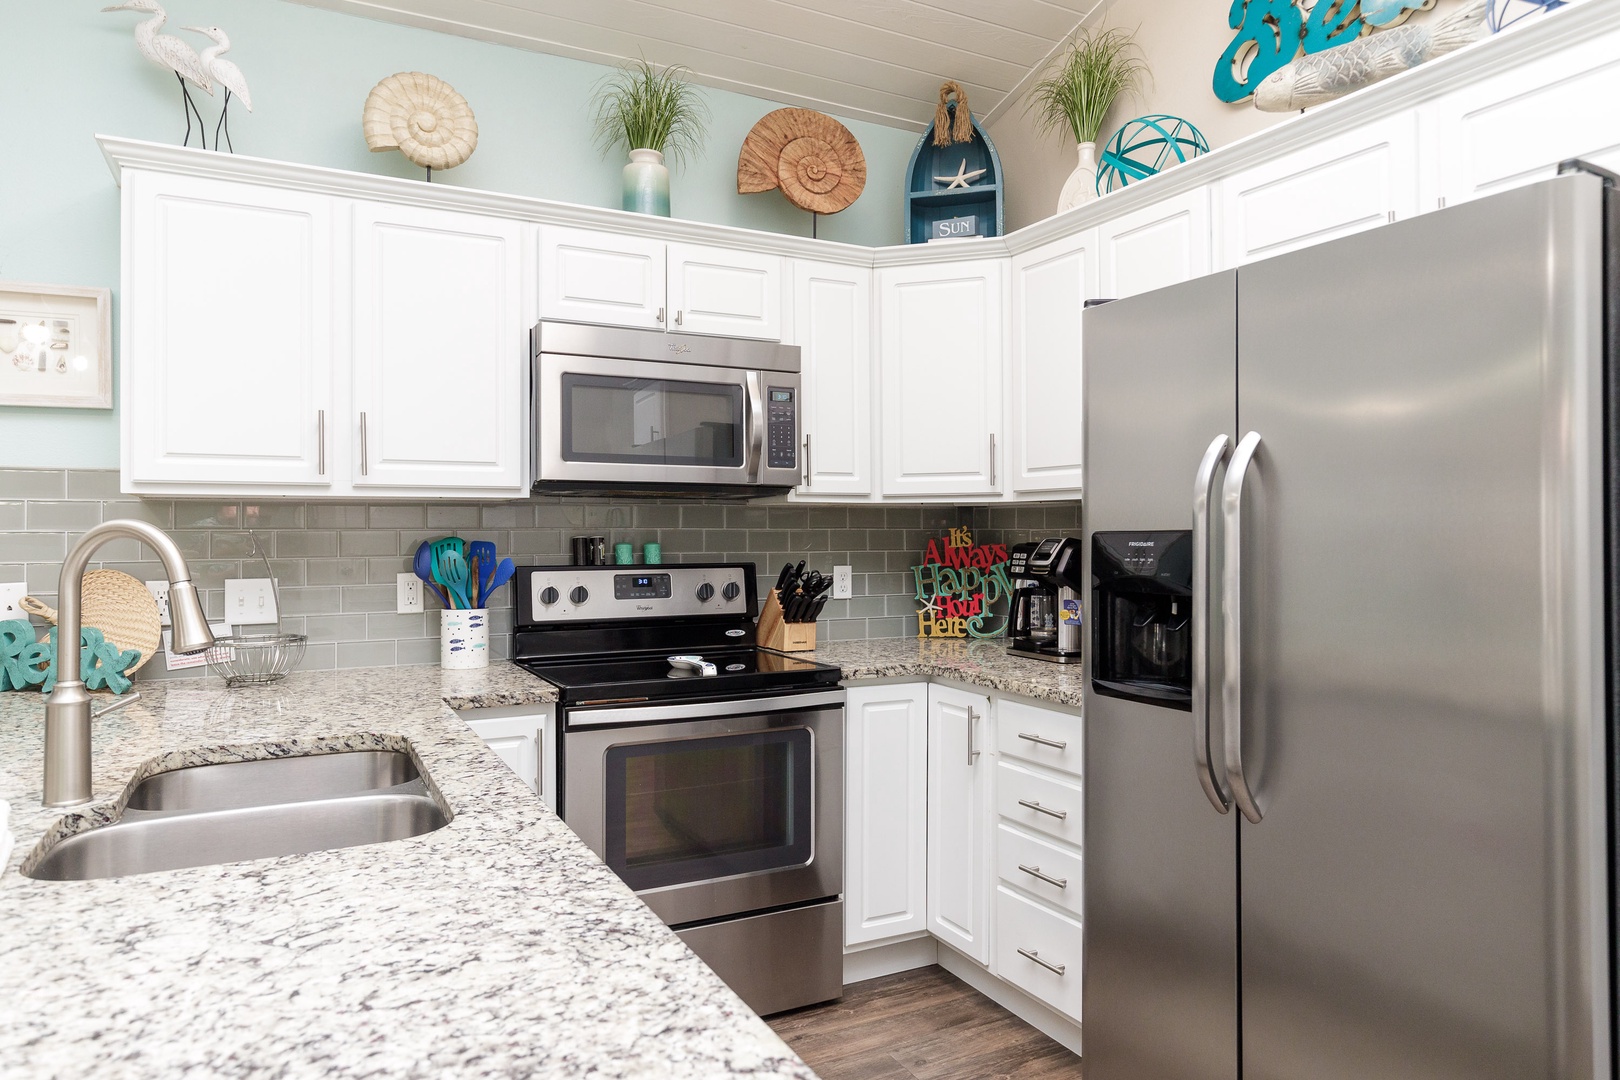 The beachy kitchen offers ample space & all the comforts of home